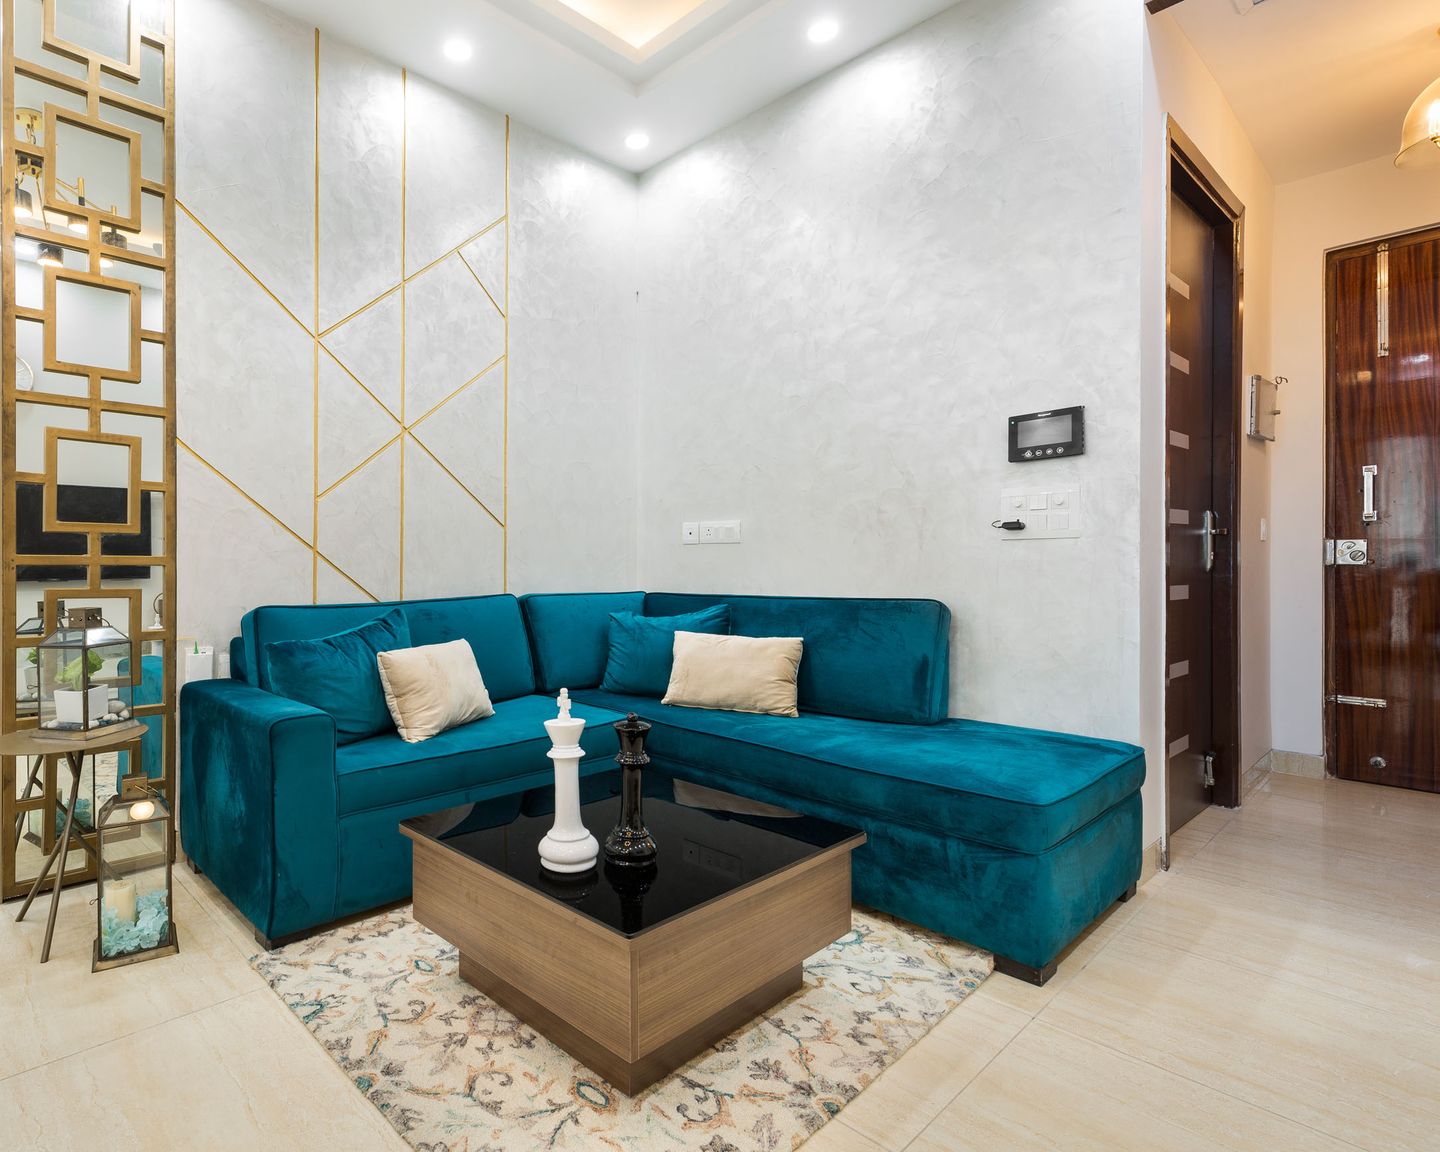 3-BHK In Noida With Teal Blue Sectional Sofa - Livspace